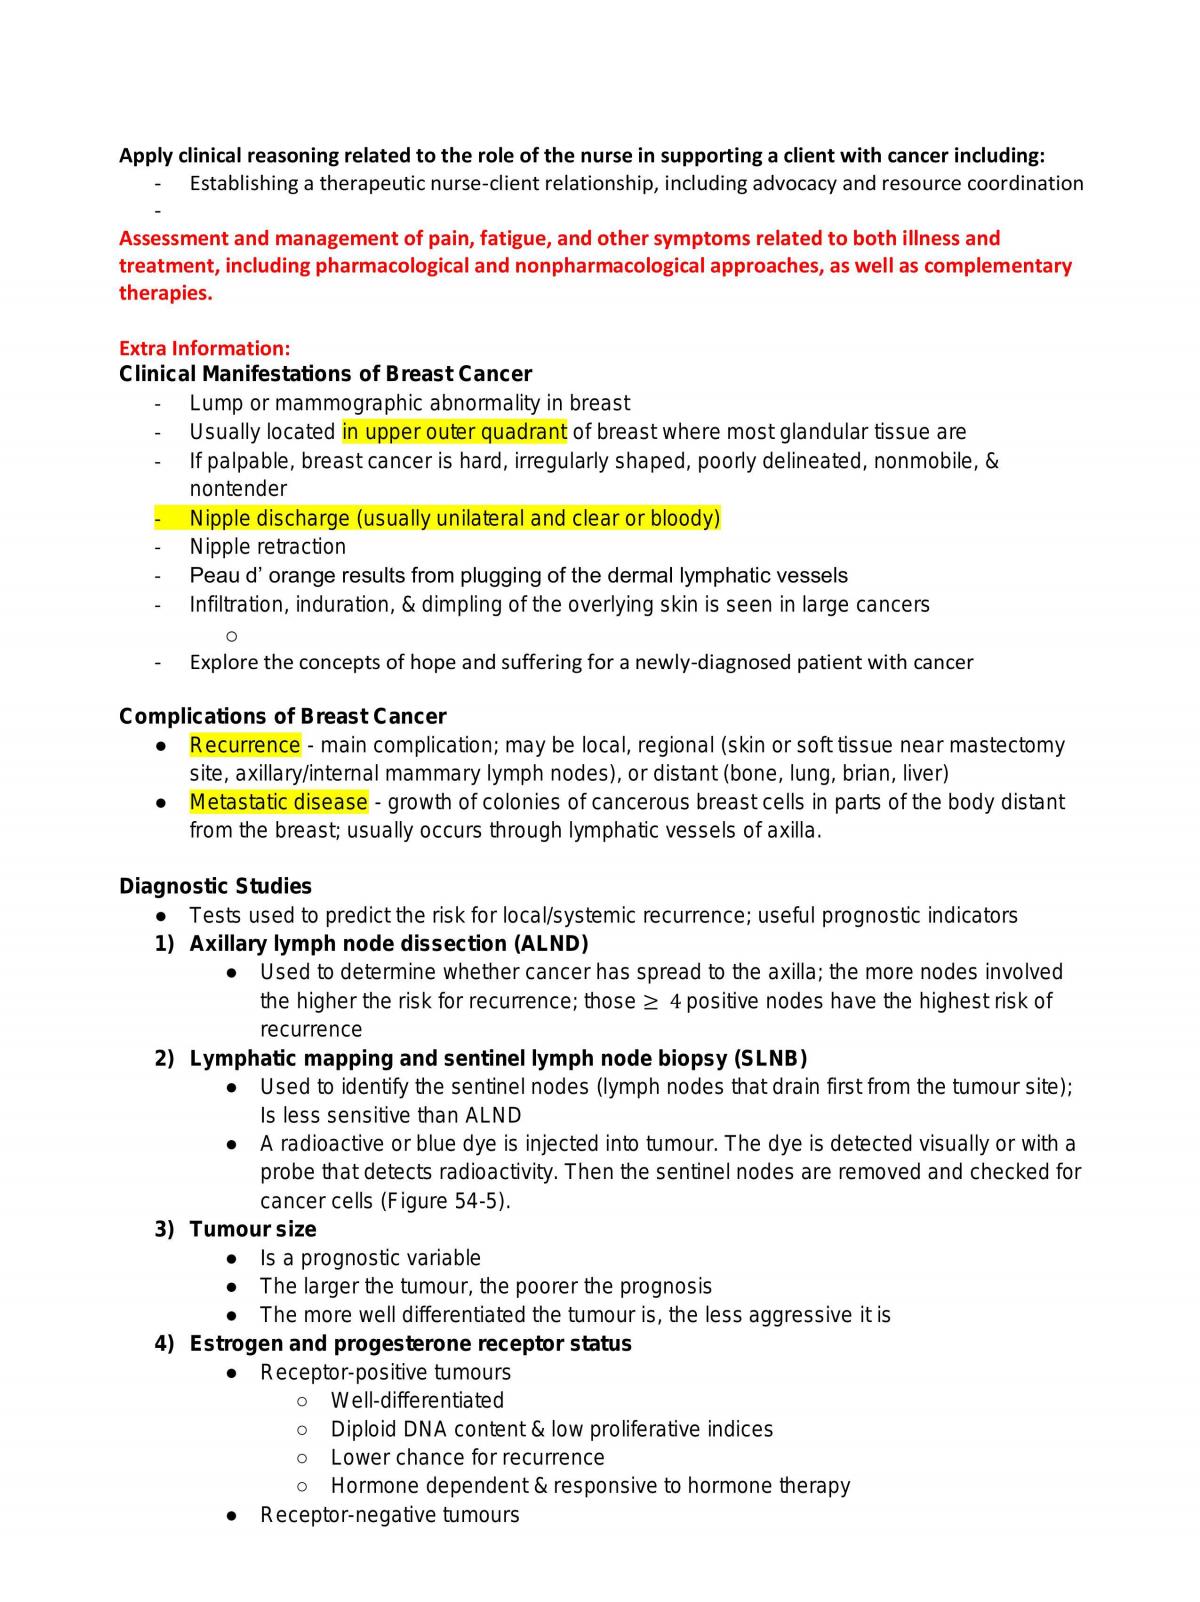 PBL II (accelerated) complete exam notes - Page 1